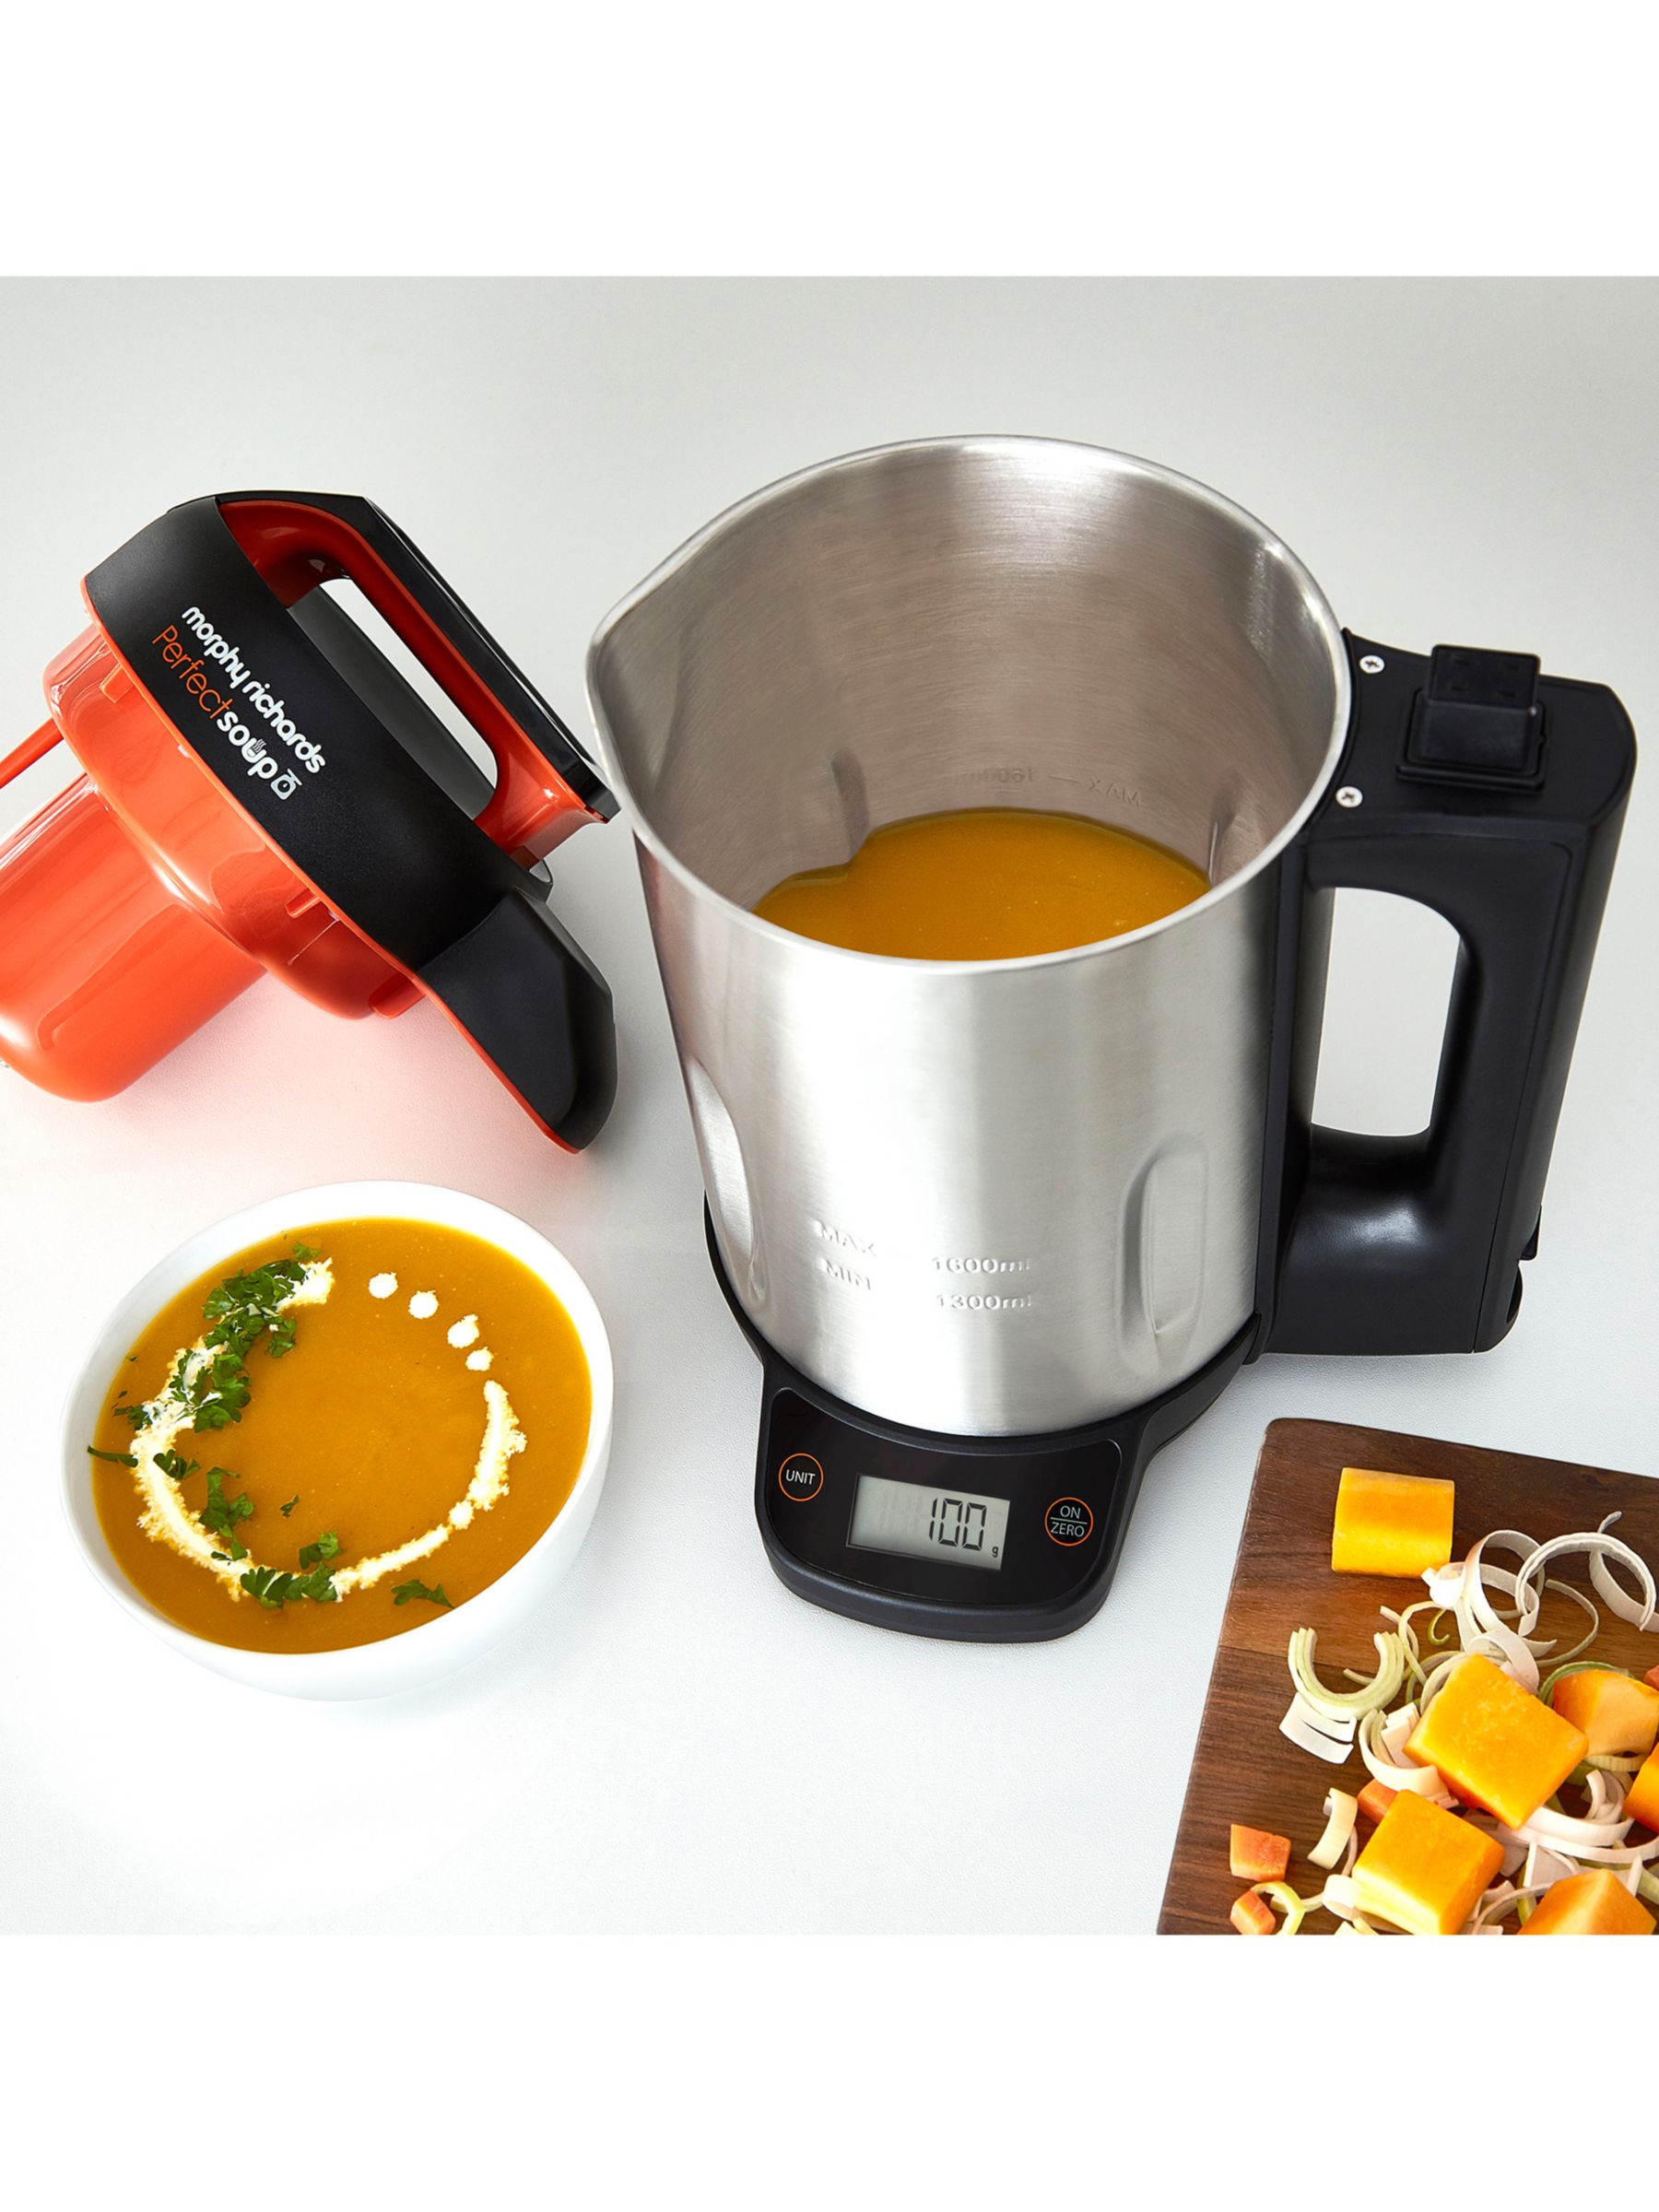 Morphy Richards Soup maker with Integrated Scales